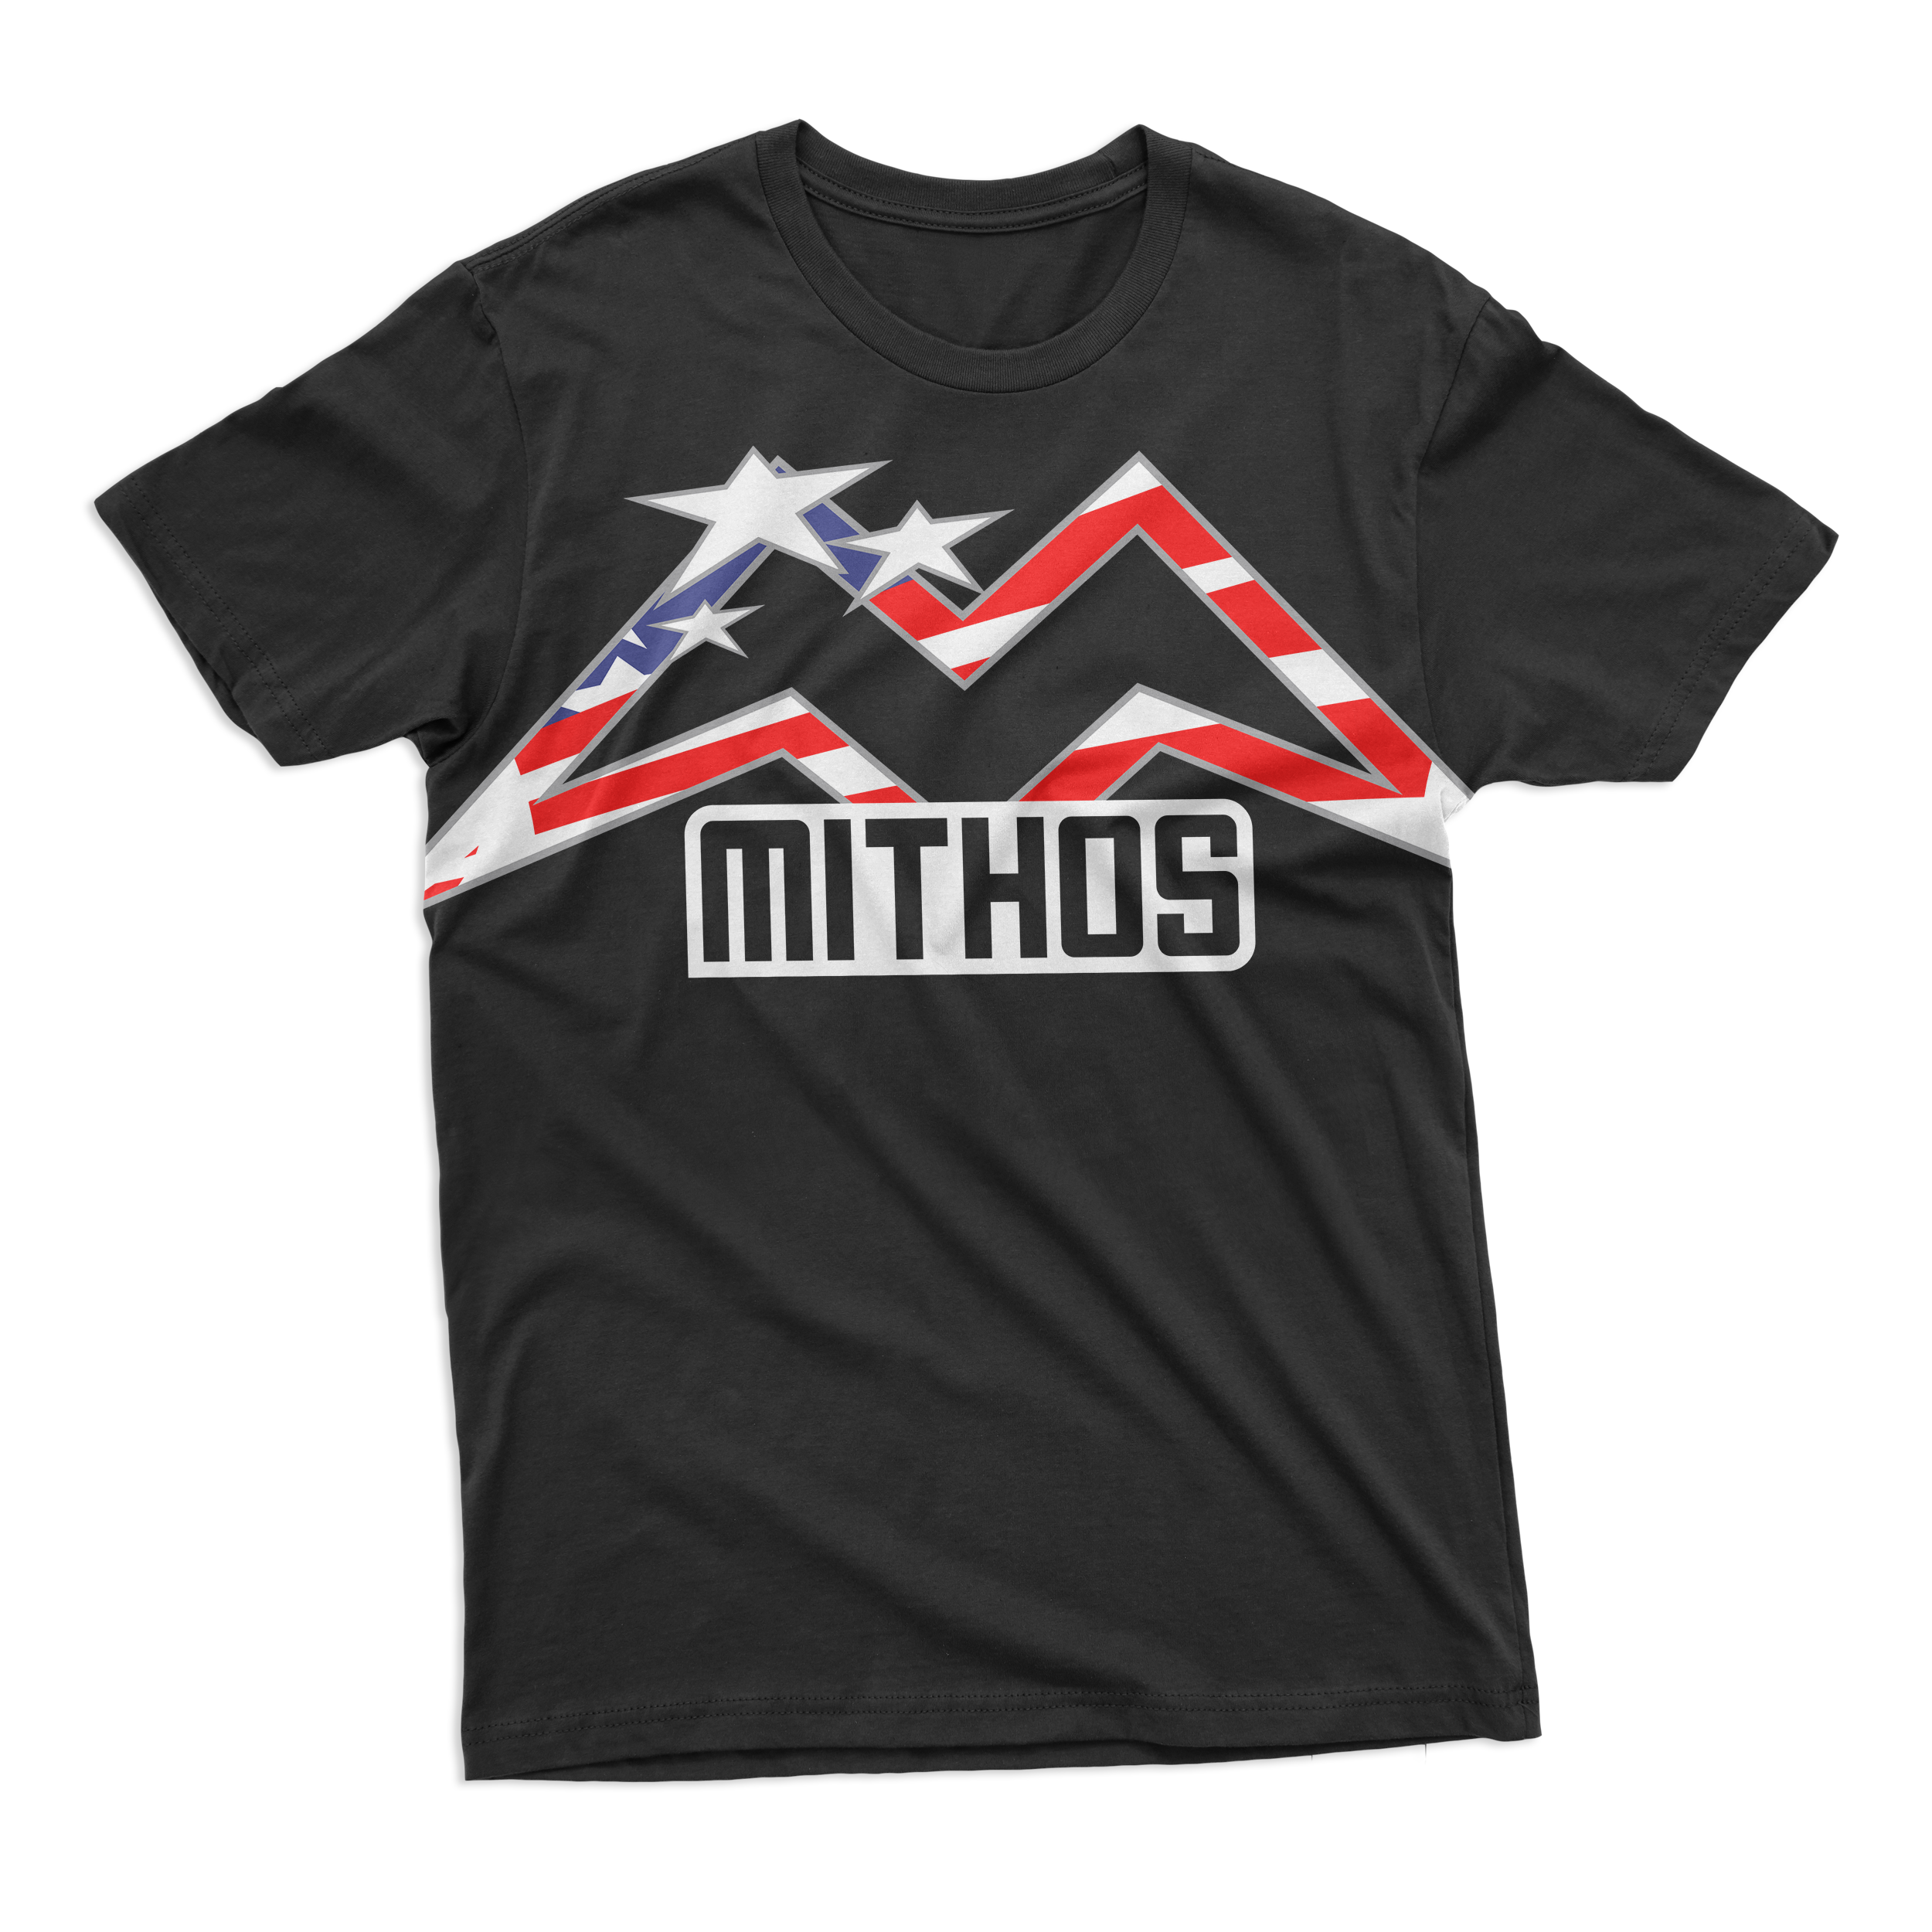 Mithos Country Shirts